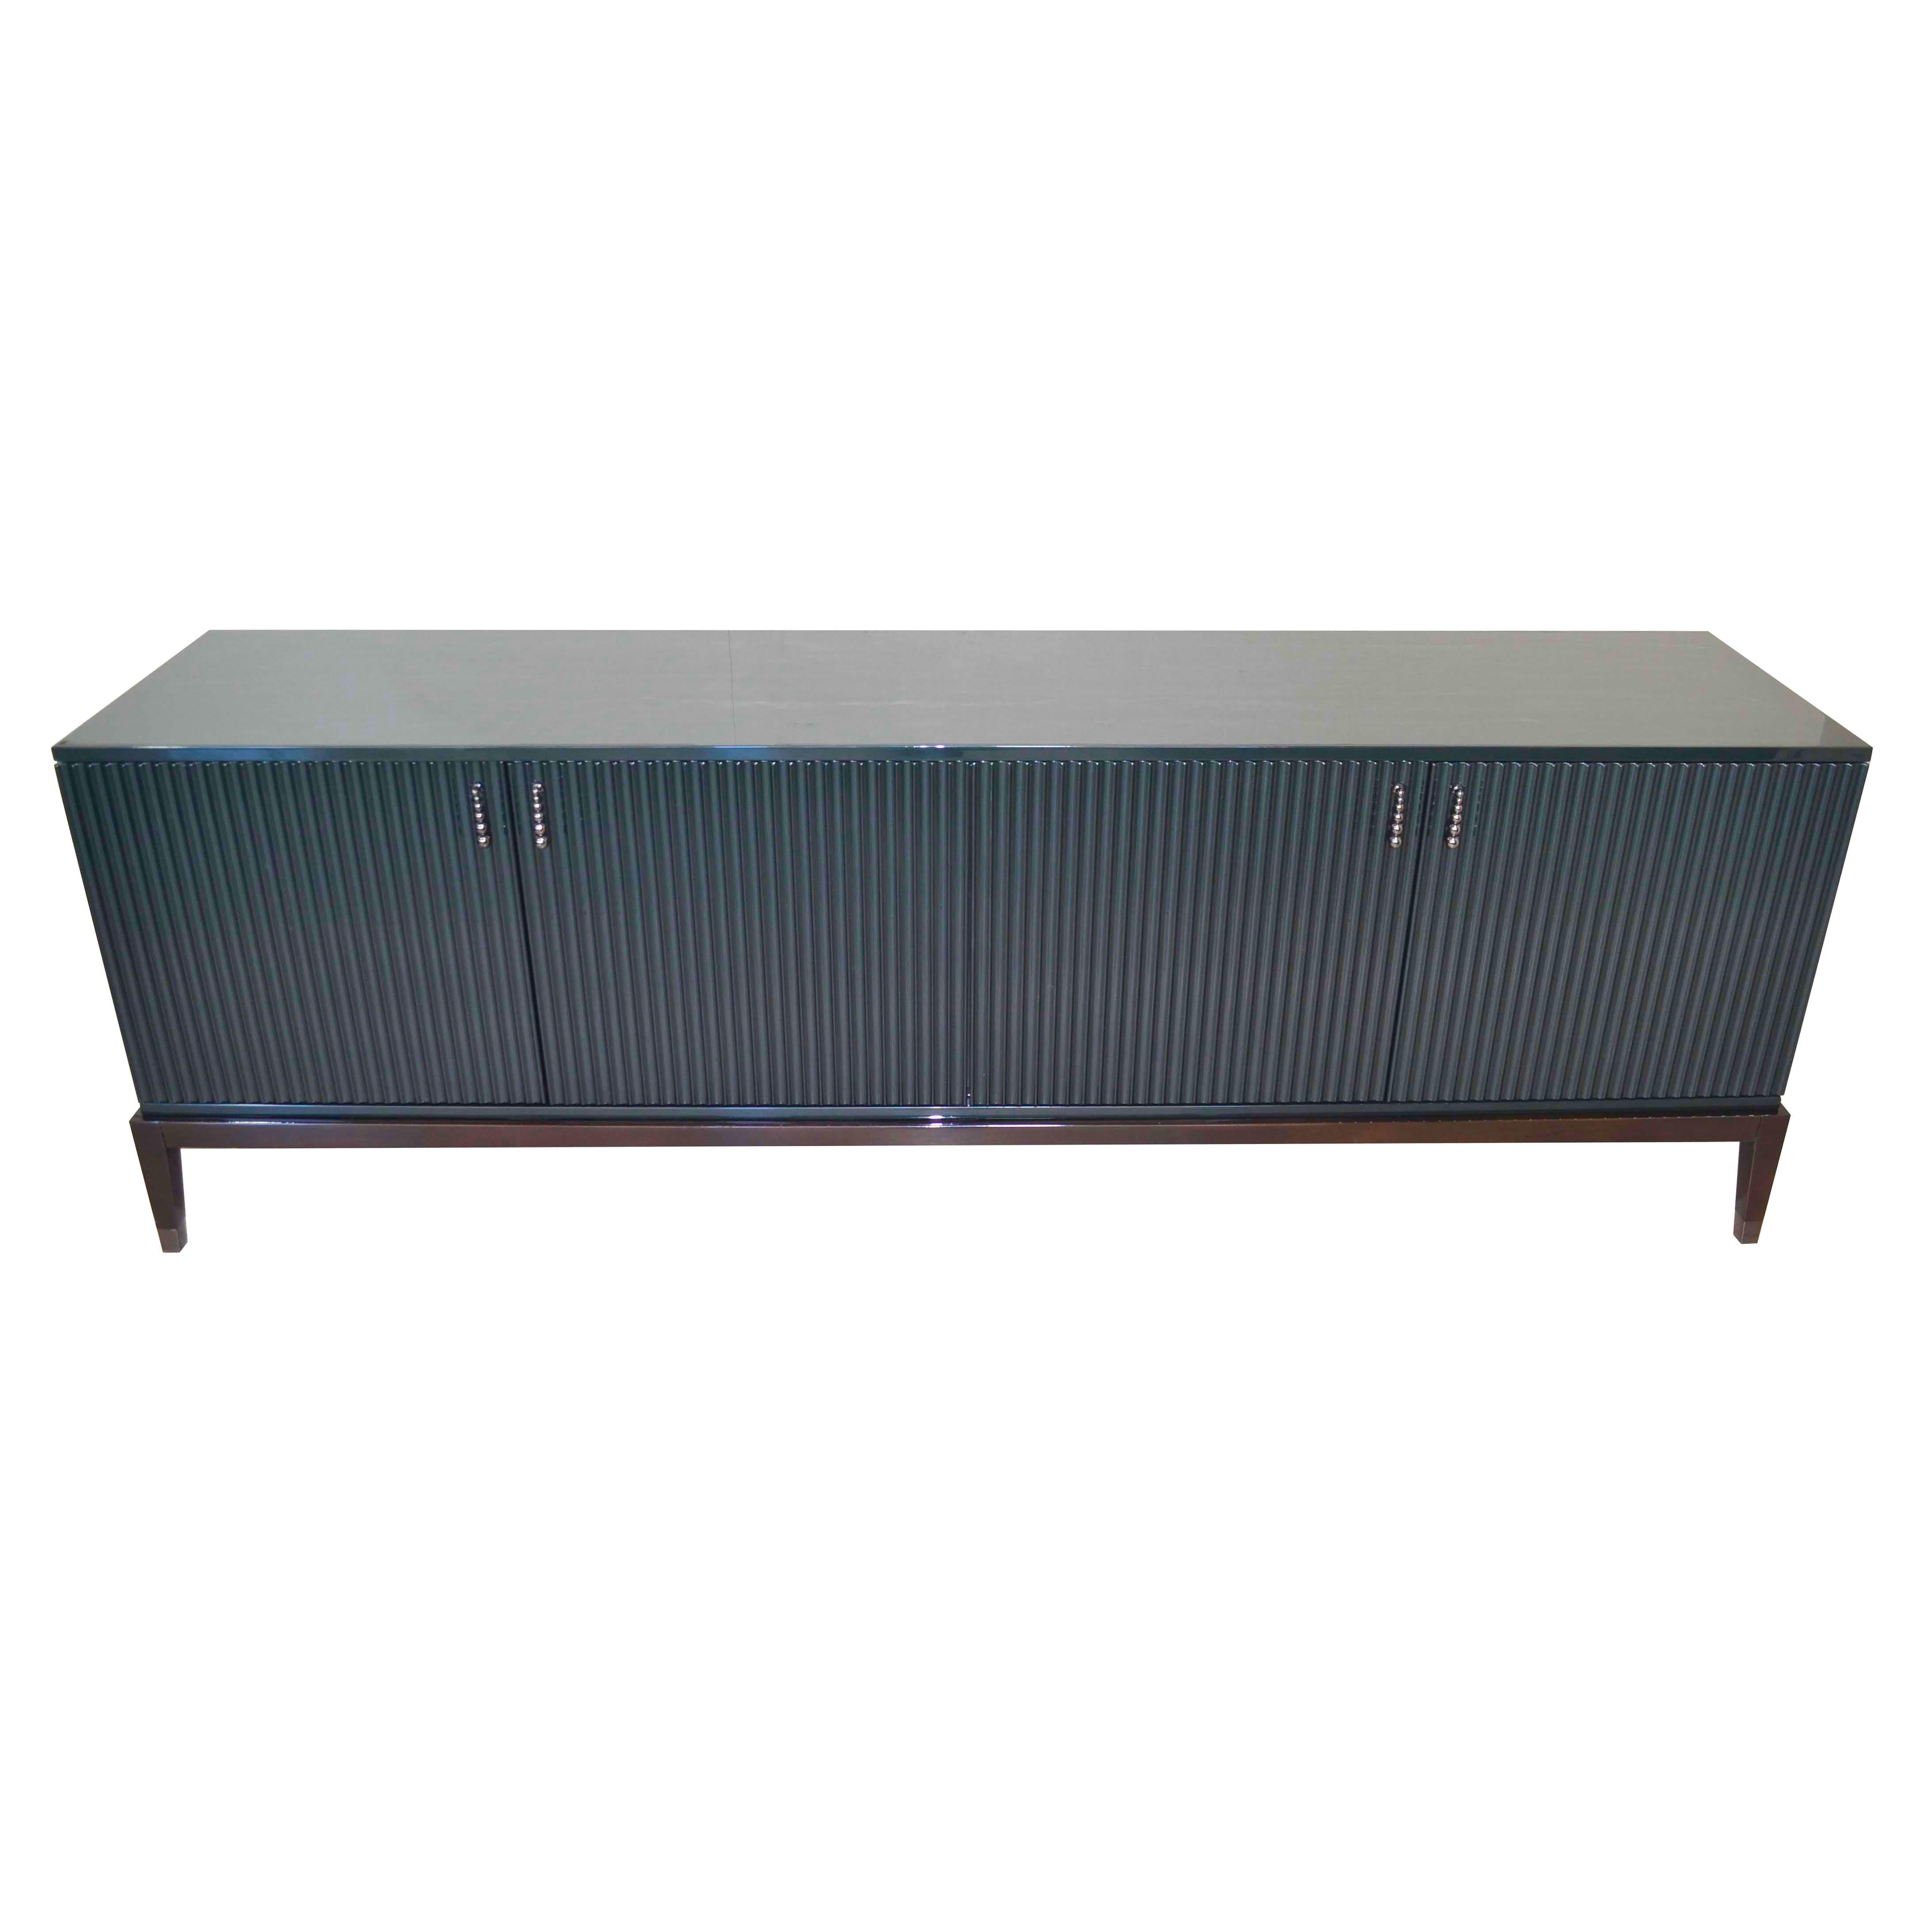 This sideboard featuring LED light inside, once at least one of the door is opened. Laquered in green smarald high-gloss is an outstanding piece in living room. Elegant and contemporary with four legs in Ebano Lucido Scuro. Also it has internal